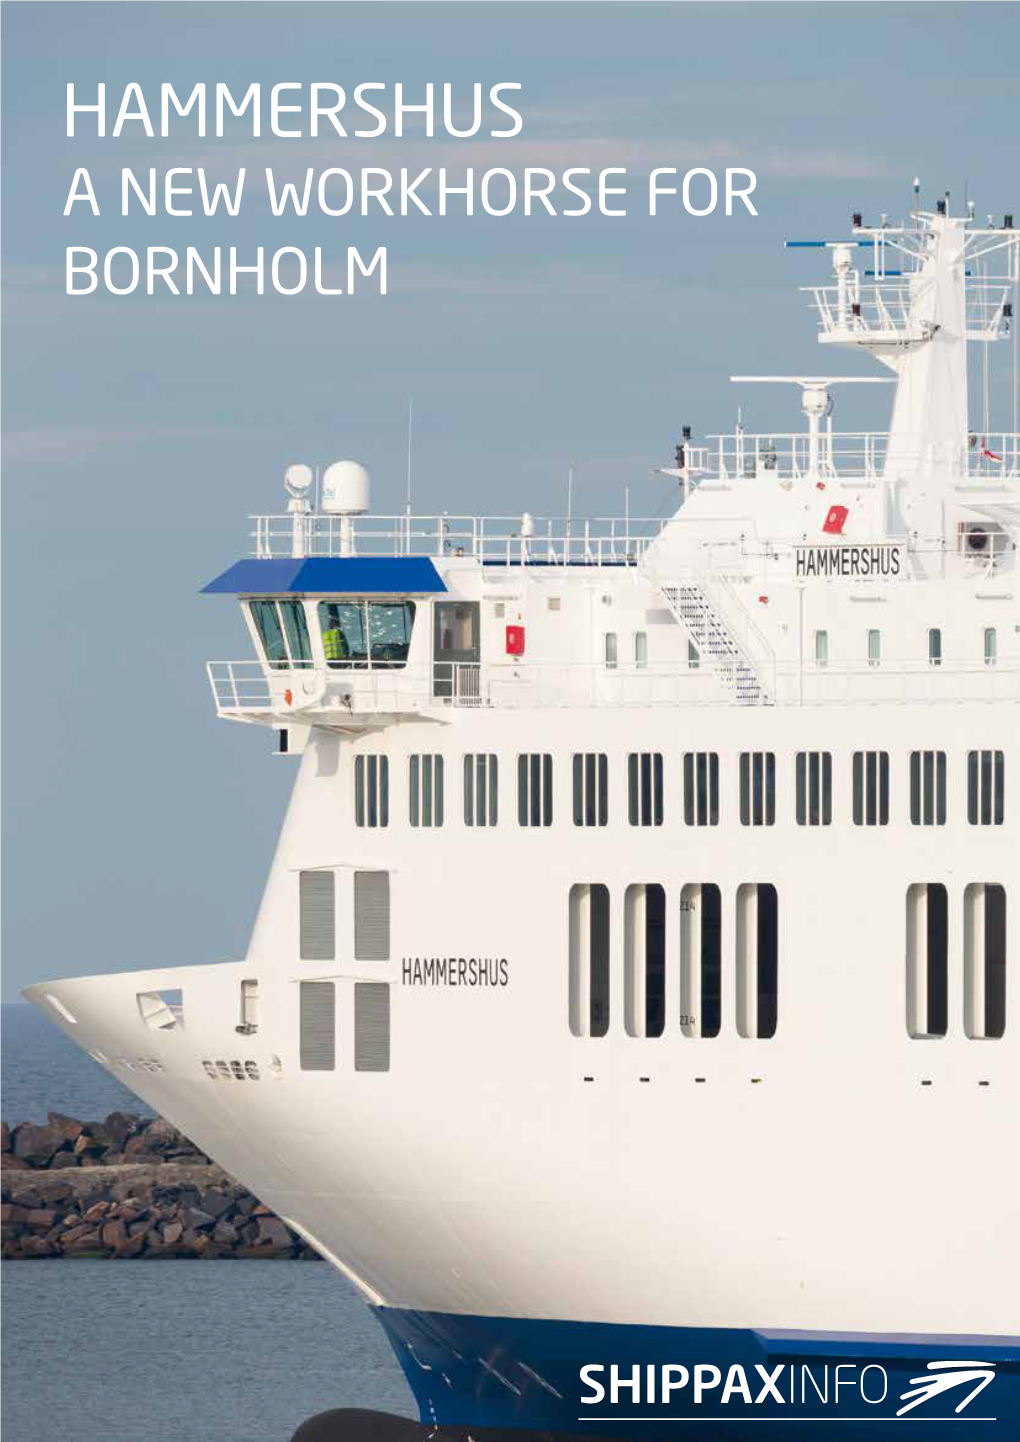 HAMMERSHUS a NEW WORKHORSE for BORNHOLM You Make Record-Breaking Profits